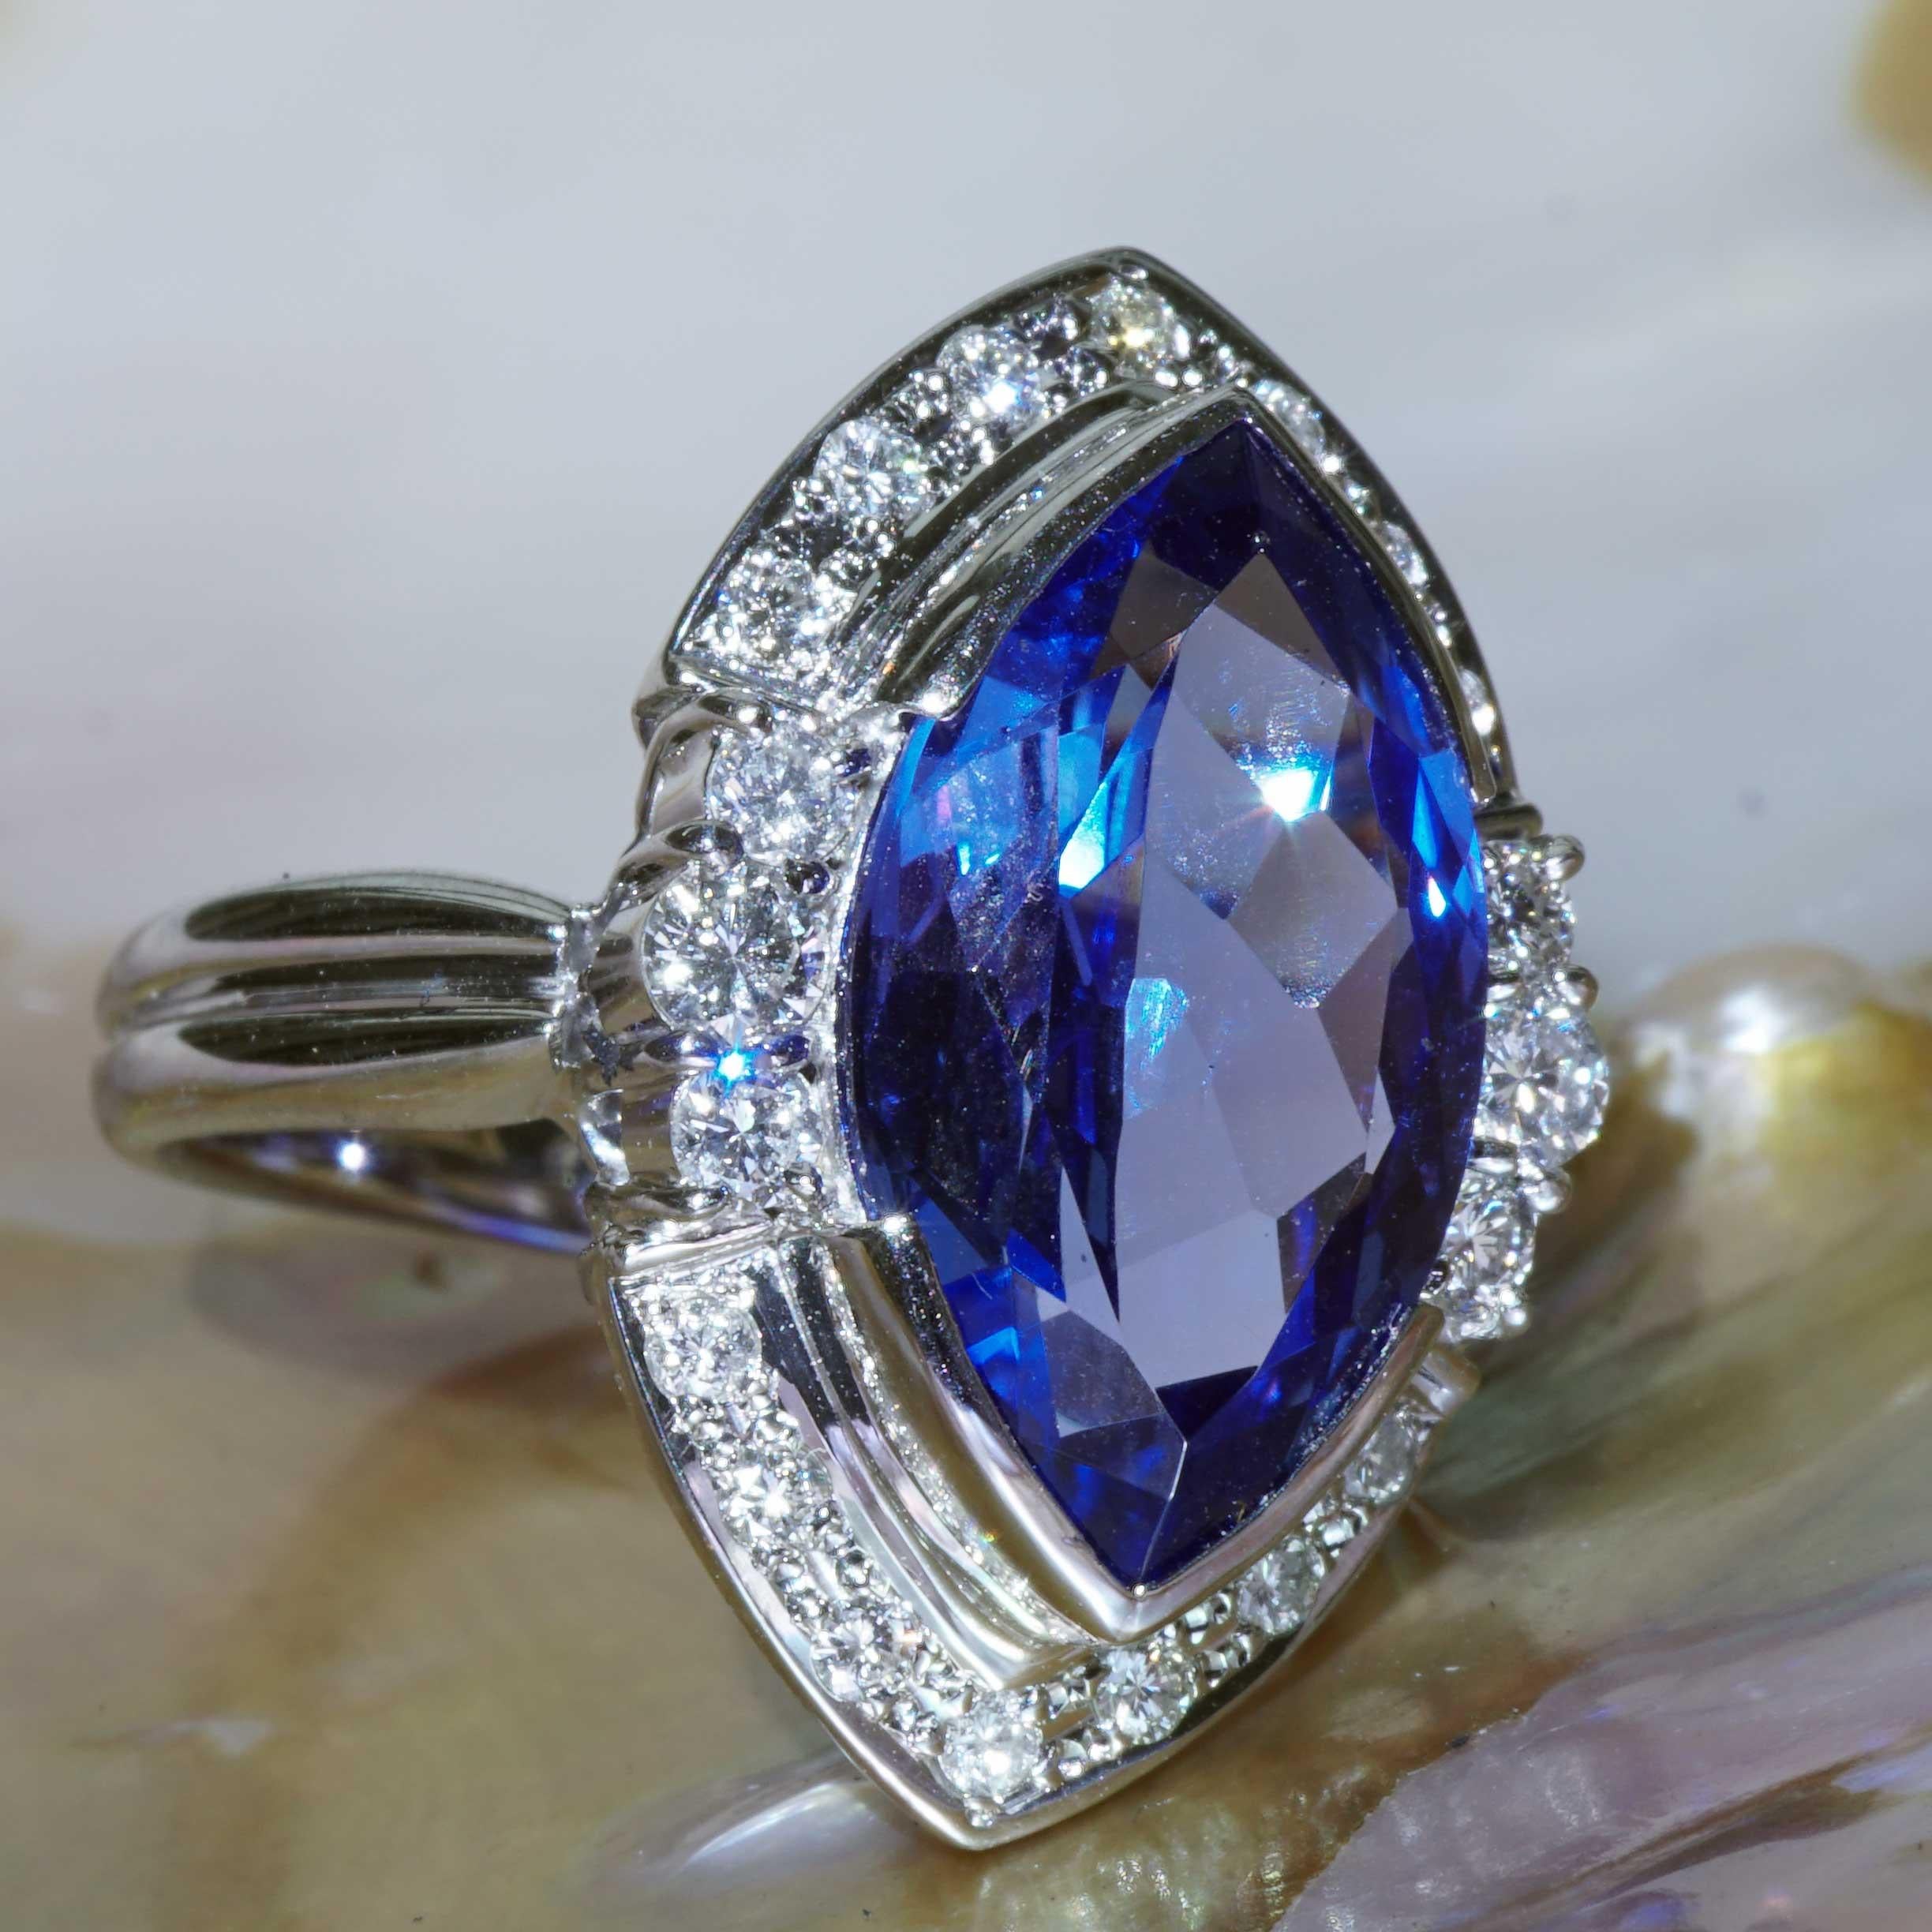 ...navetteshaped Star of Africa....Ring in 900 platinum, navette cut tanzanite of approx. 6.42 ct, fine blue, slight violet tint, just as a tanzanite should be, approx. 18 x 9.5 mm, safe and protected by two partially open chatons, full-cut